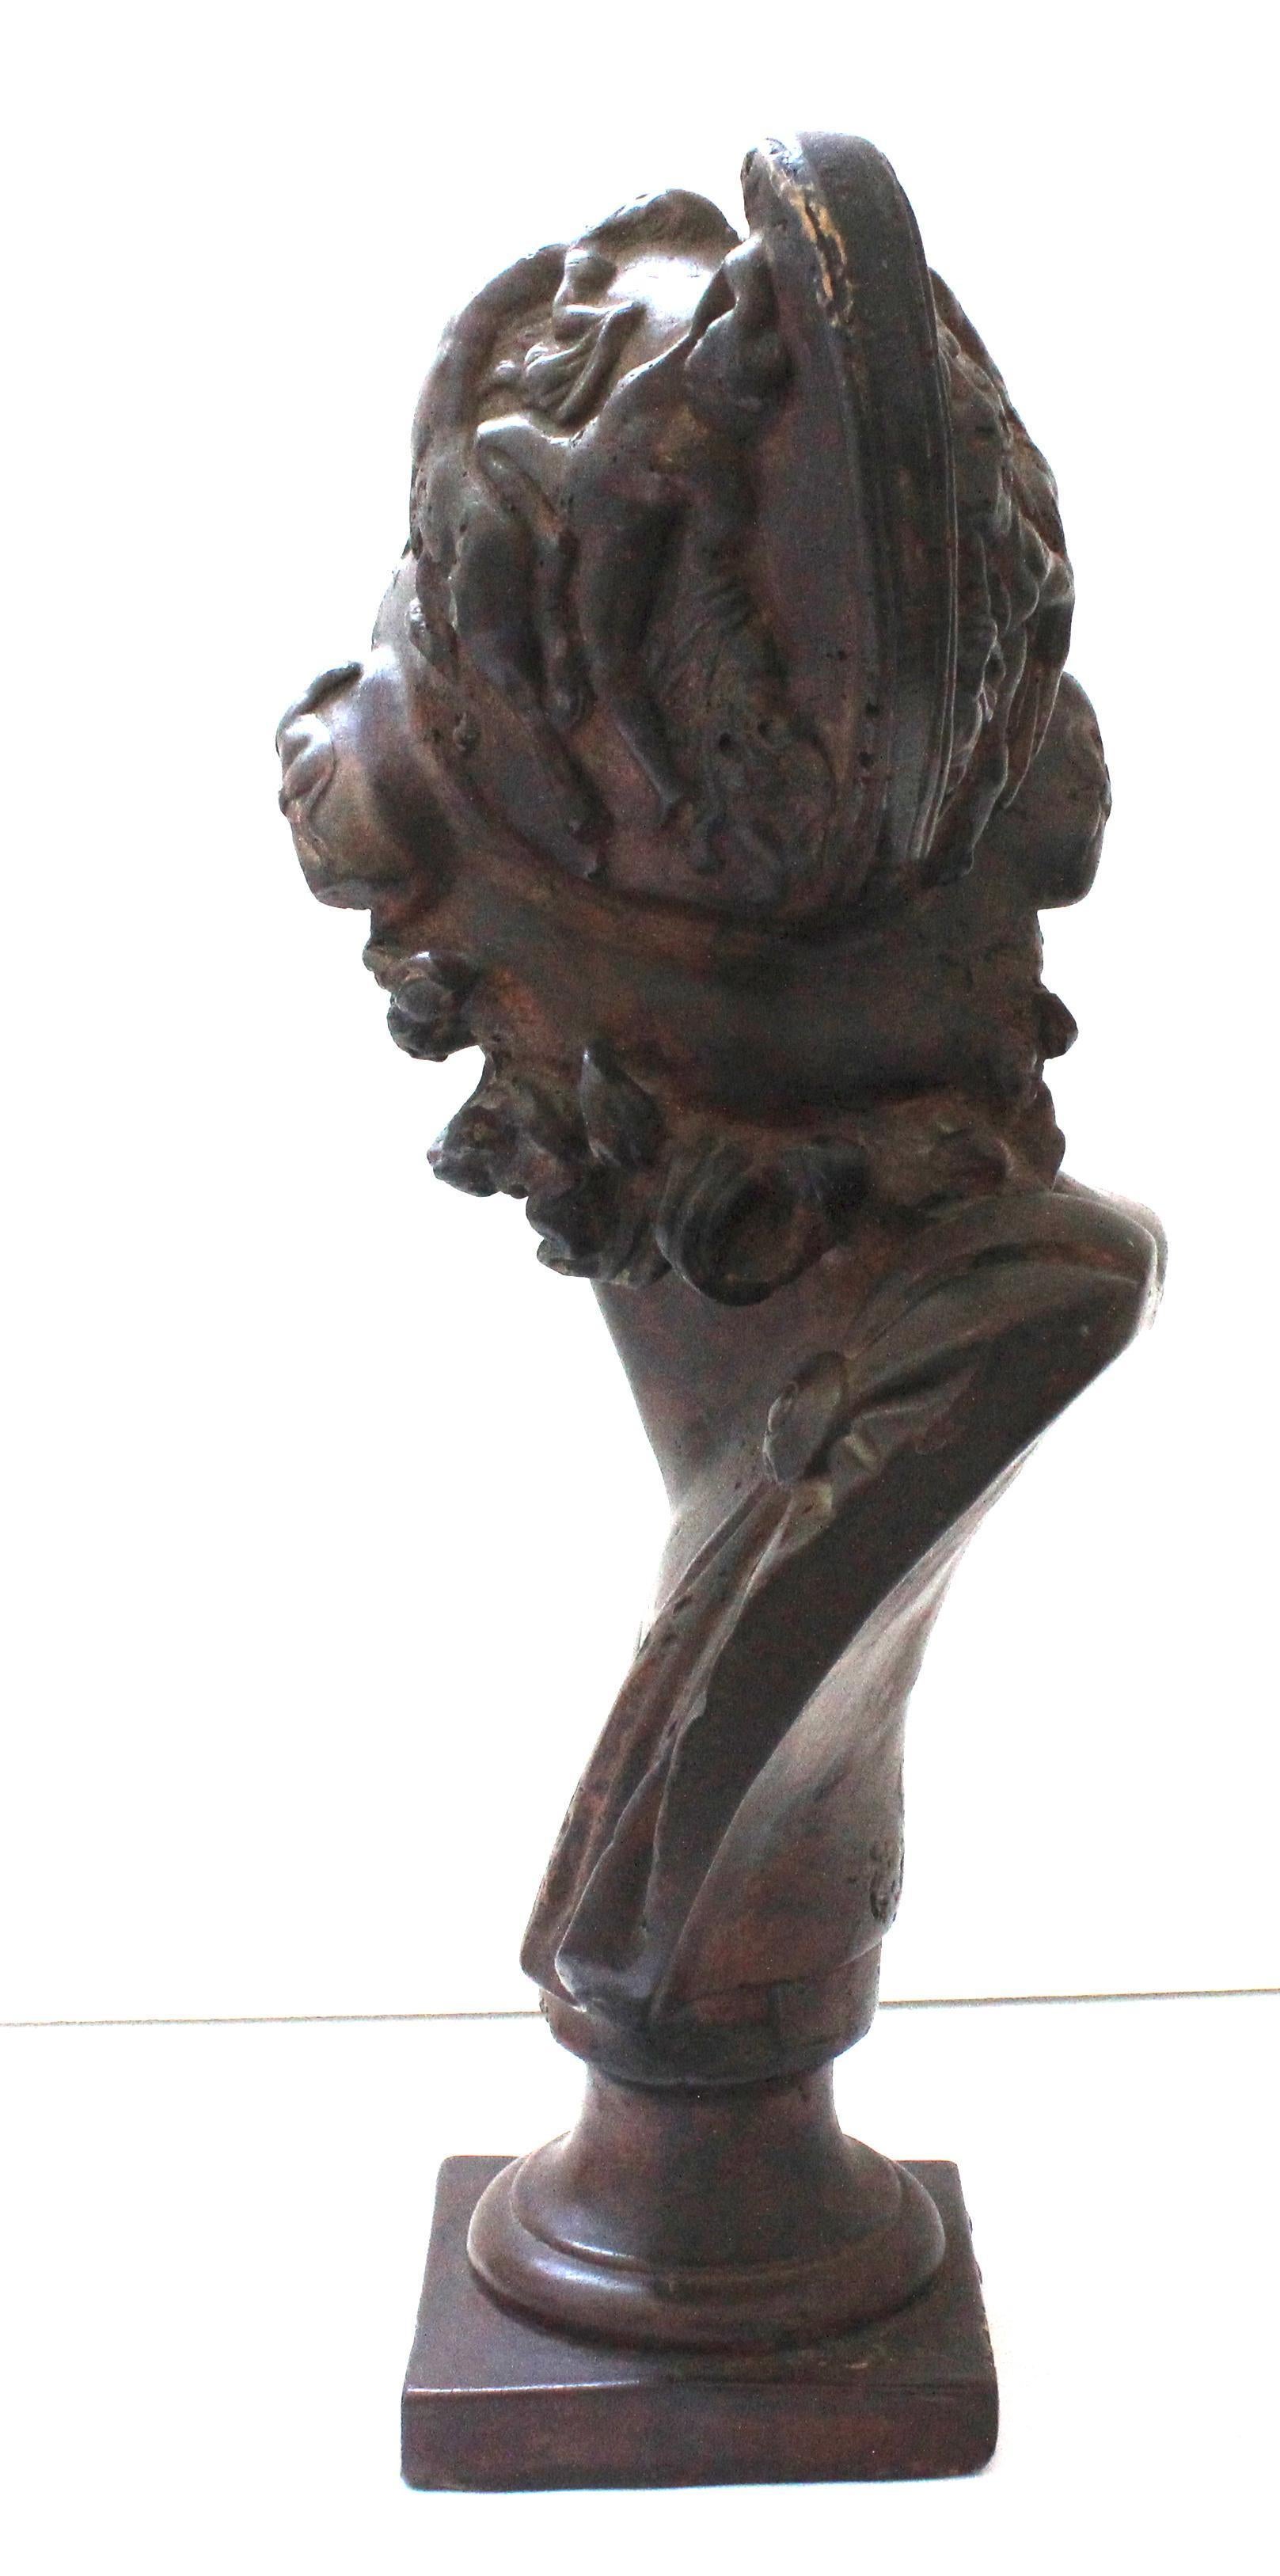 This stylish, late grand-tour bust of King Menelaus is fabricated in solid cast plaster, that has a hand applied faux bronze finish.